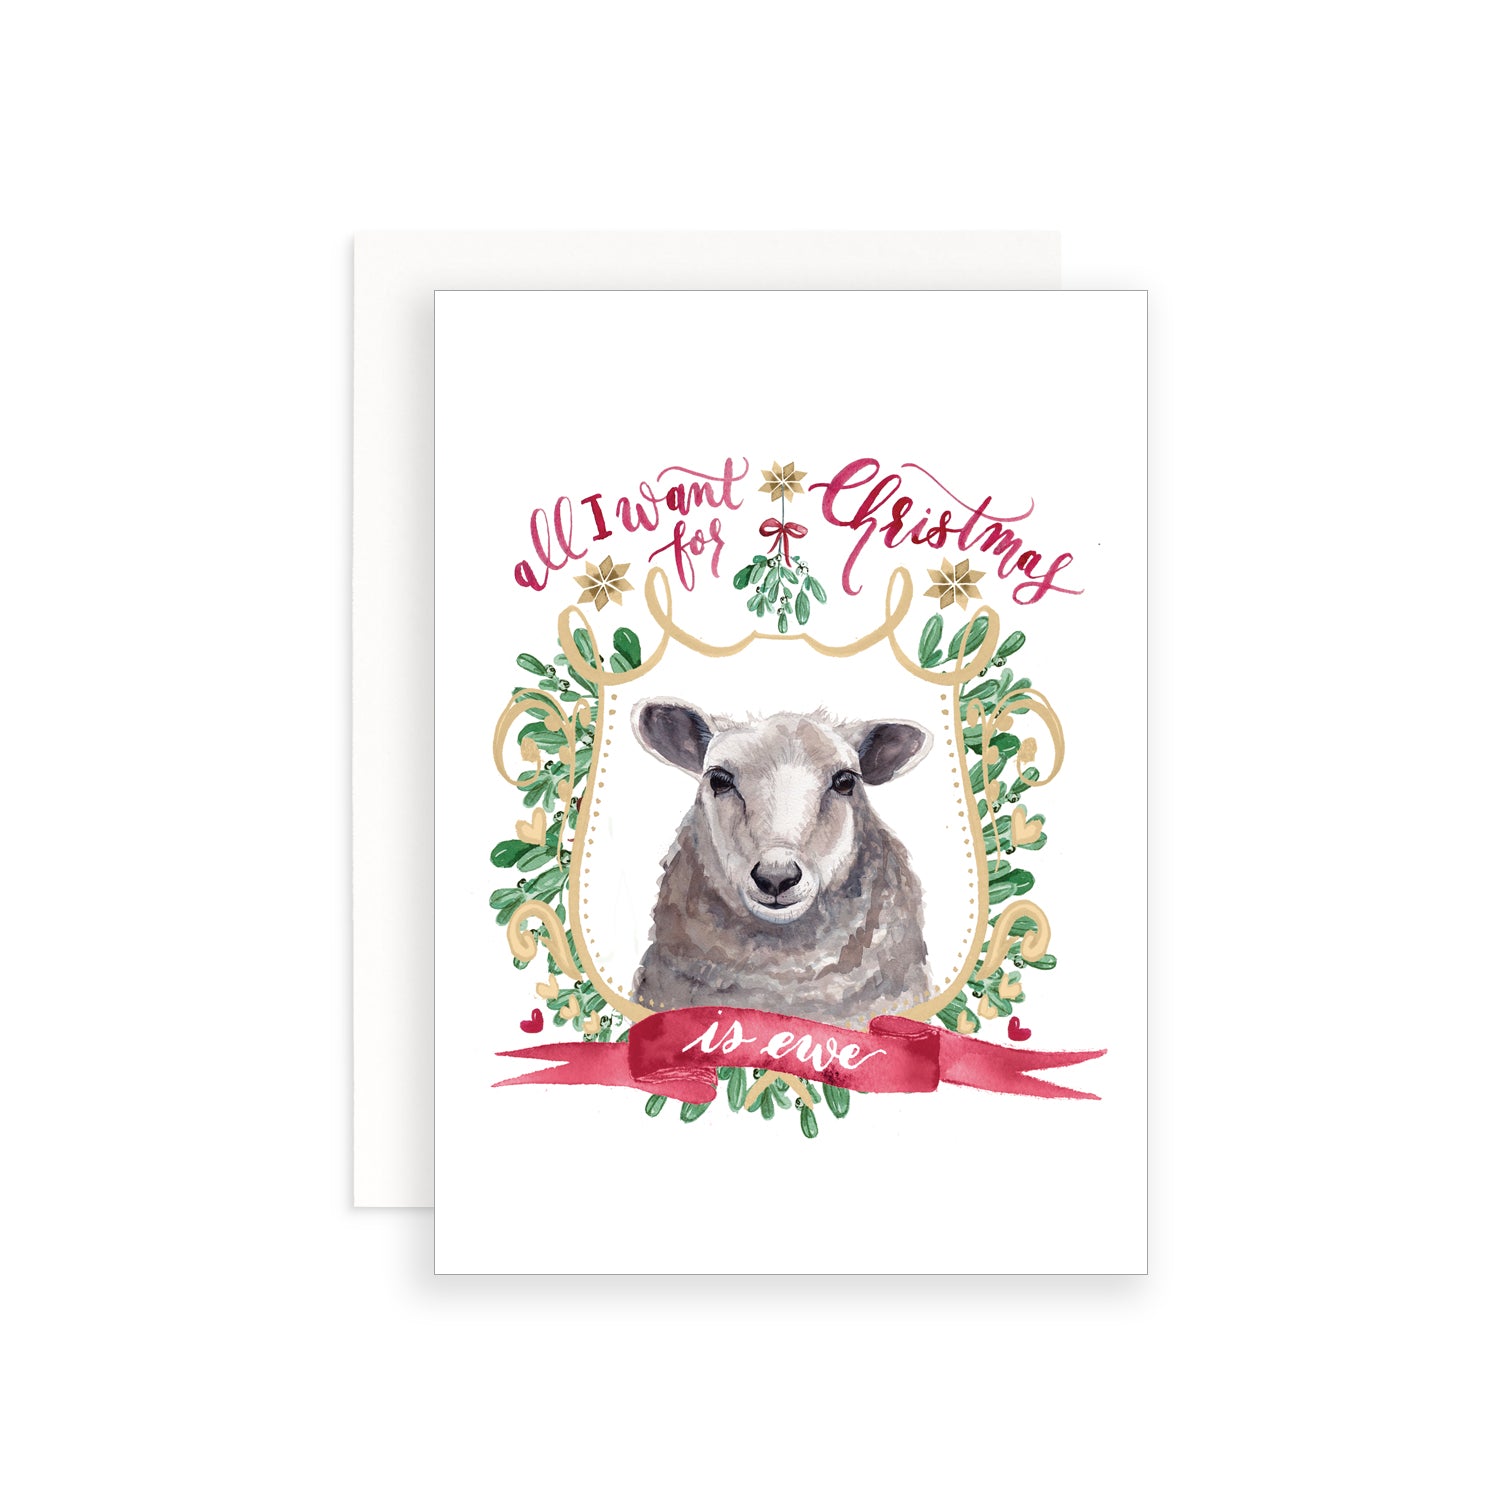 All I Want for Christmas is Ewe Greeting Card